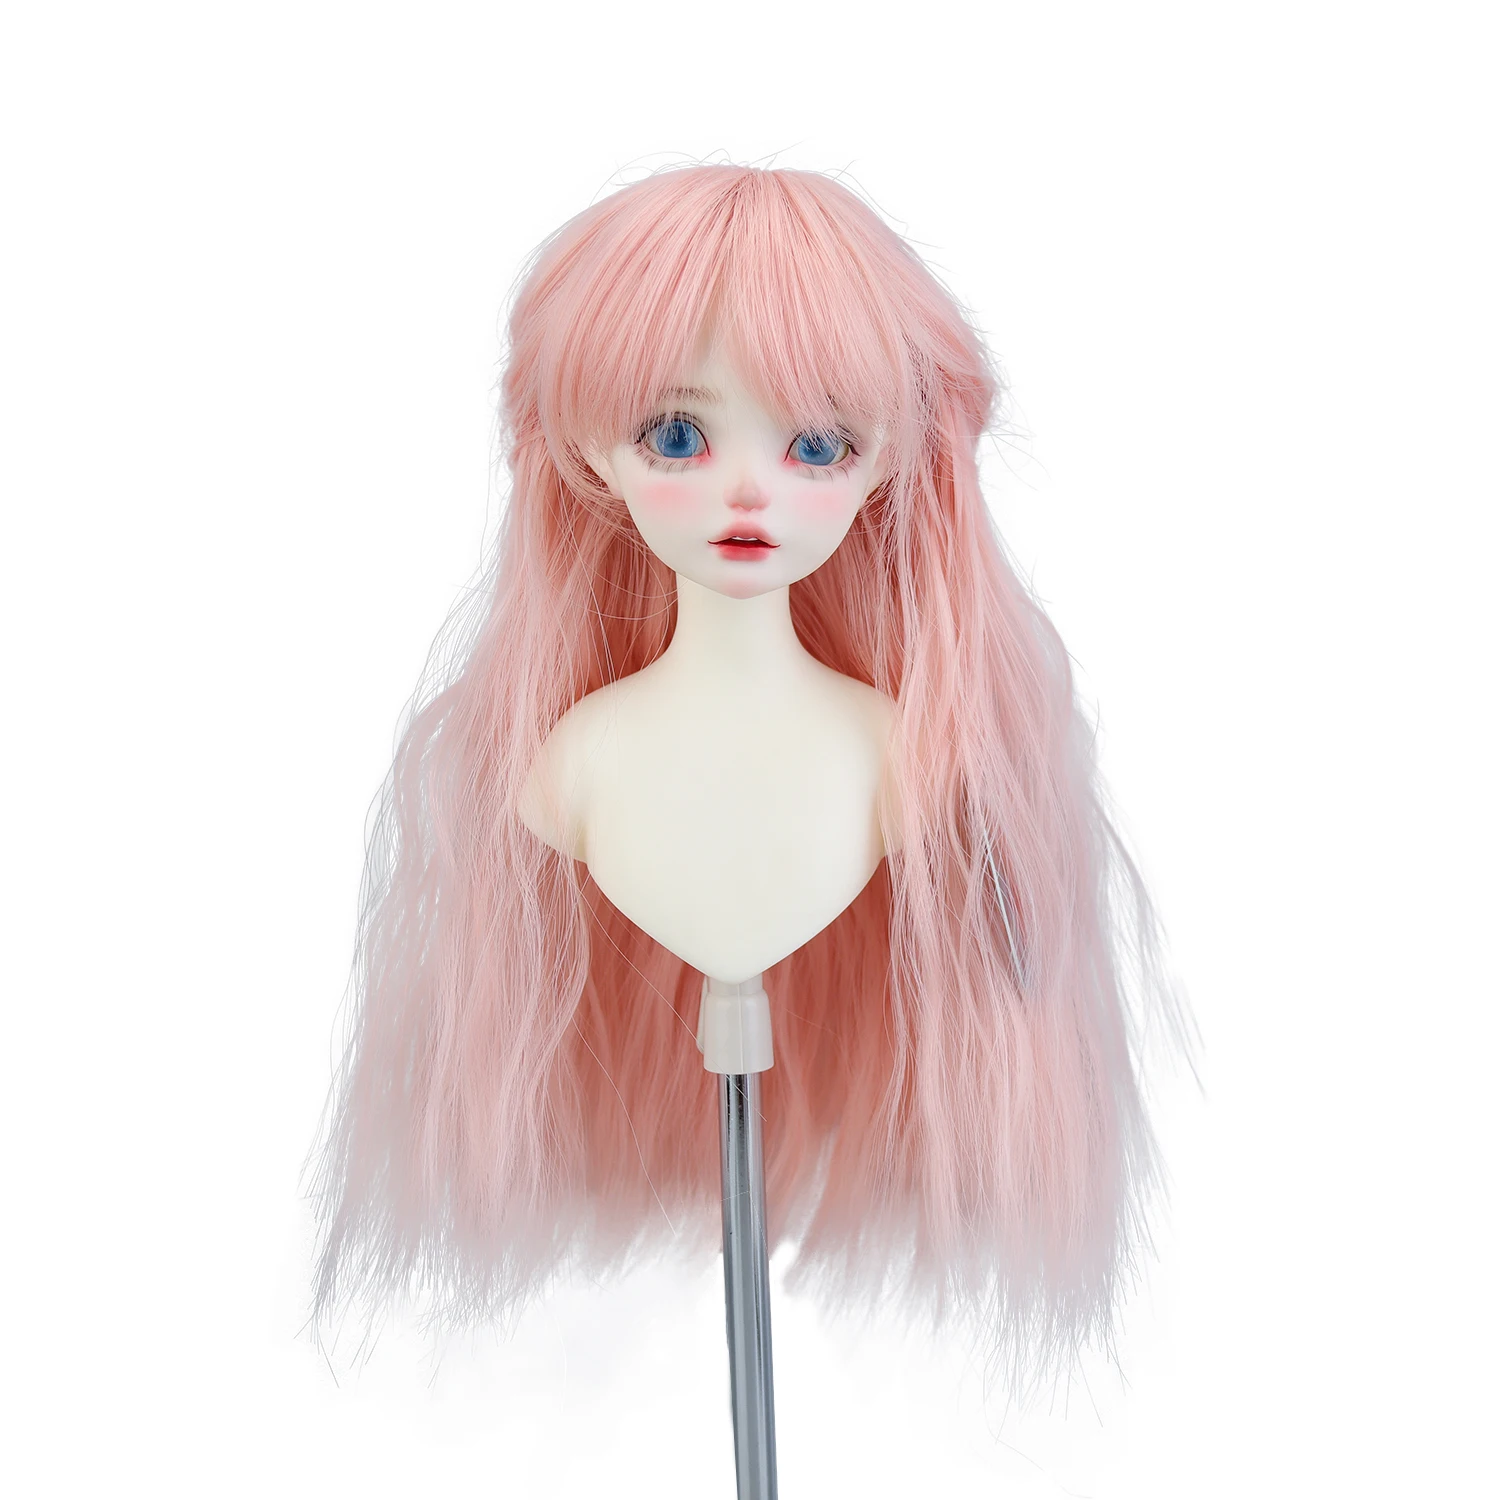 15pcs free shipping new product blank sublimation ruler bookmarks heart pendant heat transfer blank material diy Free Shipping 1/4 BJD Doll Wigs Doll Accessories Heat Resistant Synthetic Doll Wig Hair Wavy Hair For SD Minifee Doll Tress